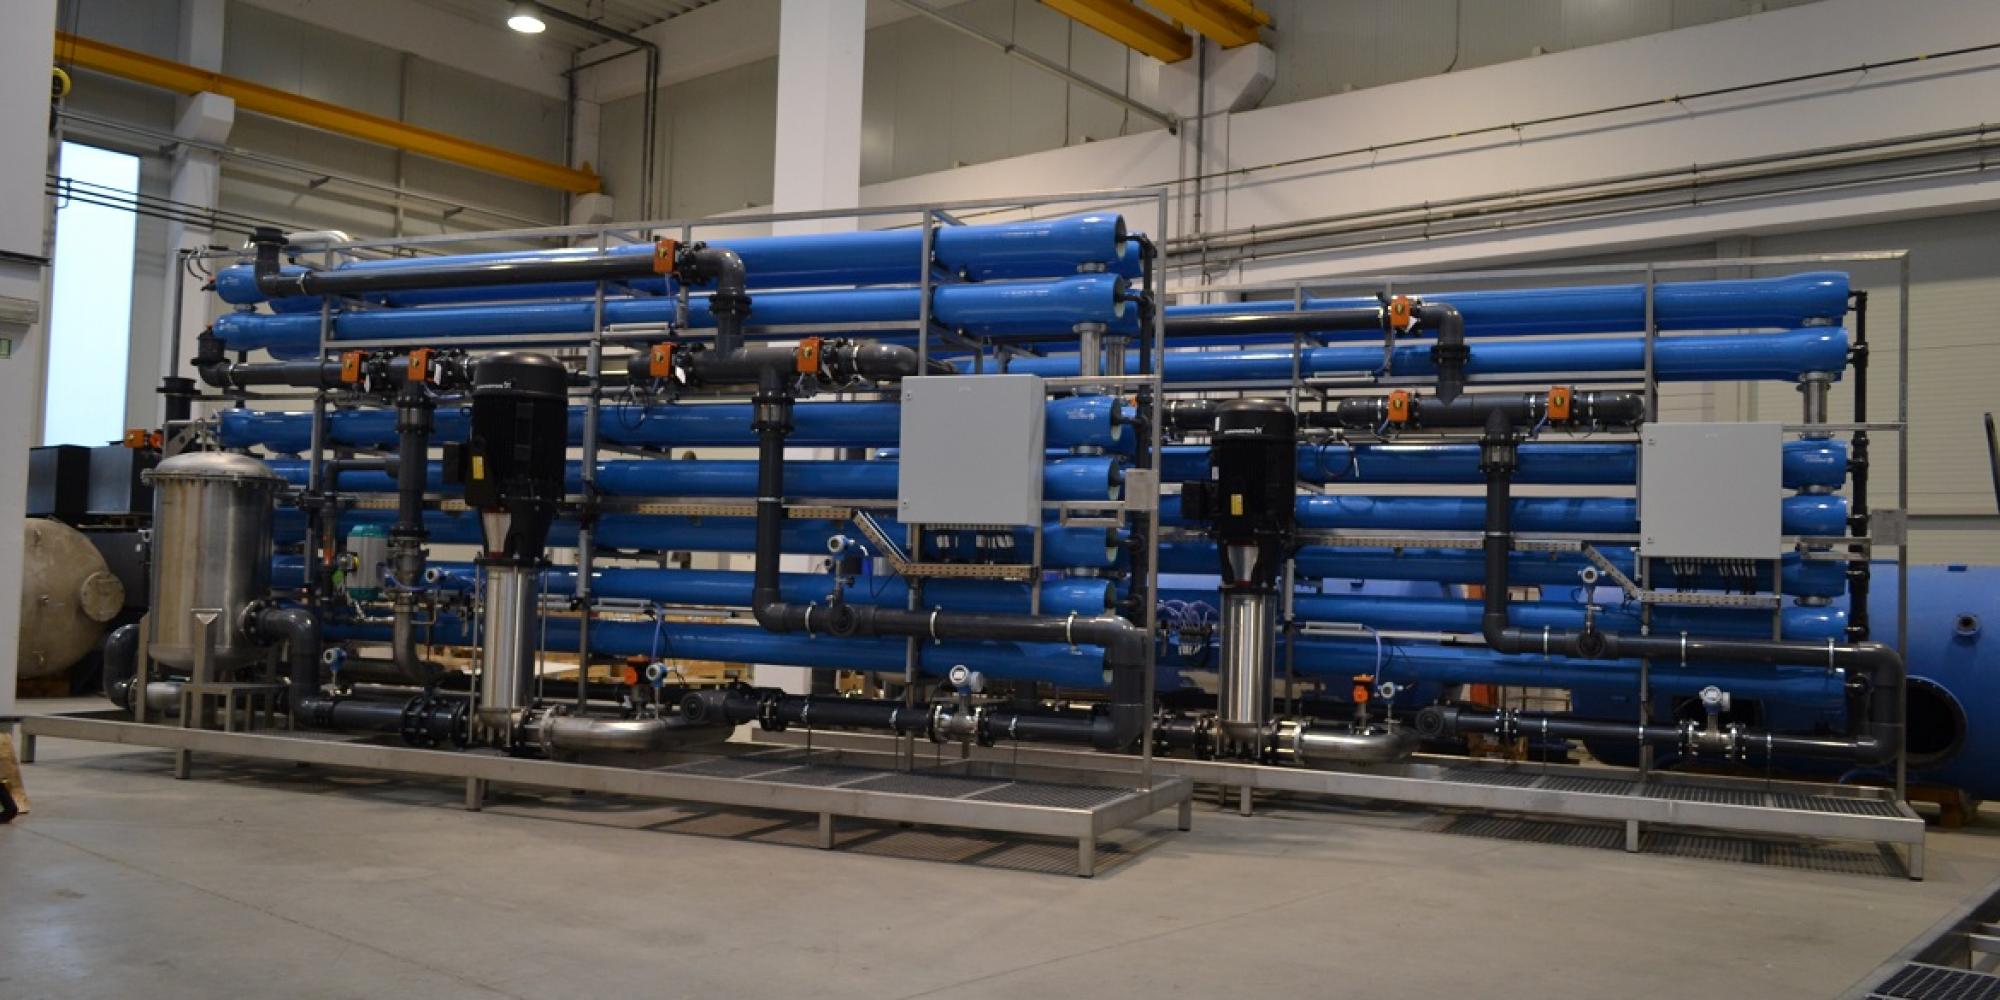 Desalination system for a coal-fueled power plant in Poland